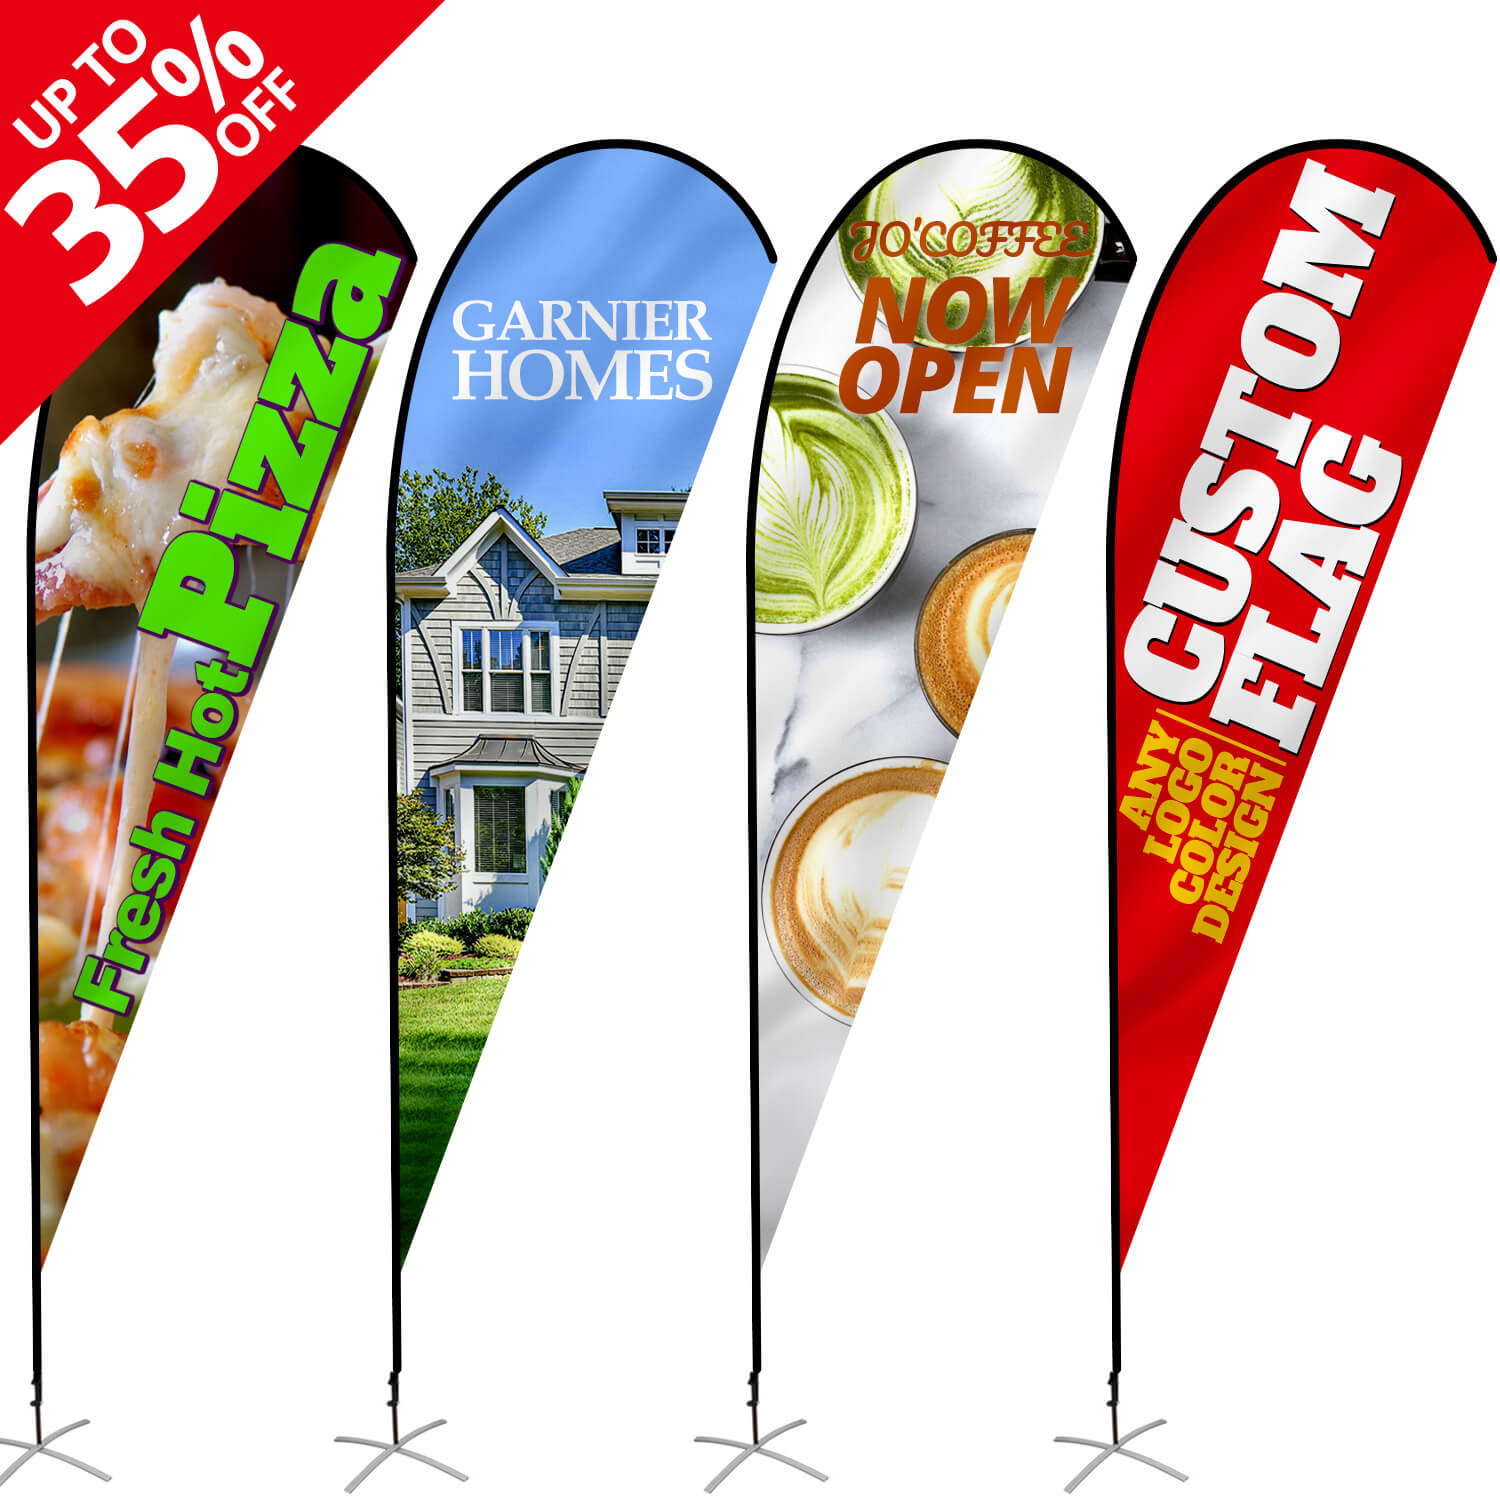  for Sale Banner Sign, Real Estate Sign Banner 5' X 2' ft :  Business And Store Signs : Office Products